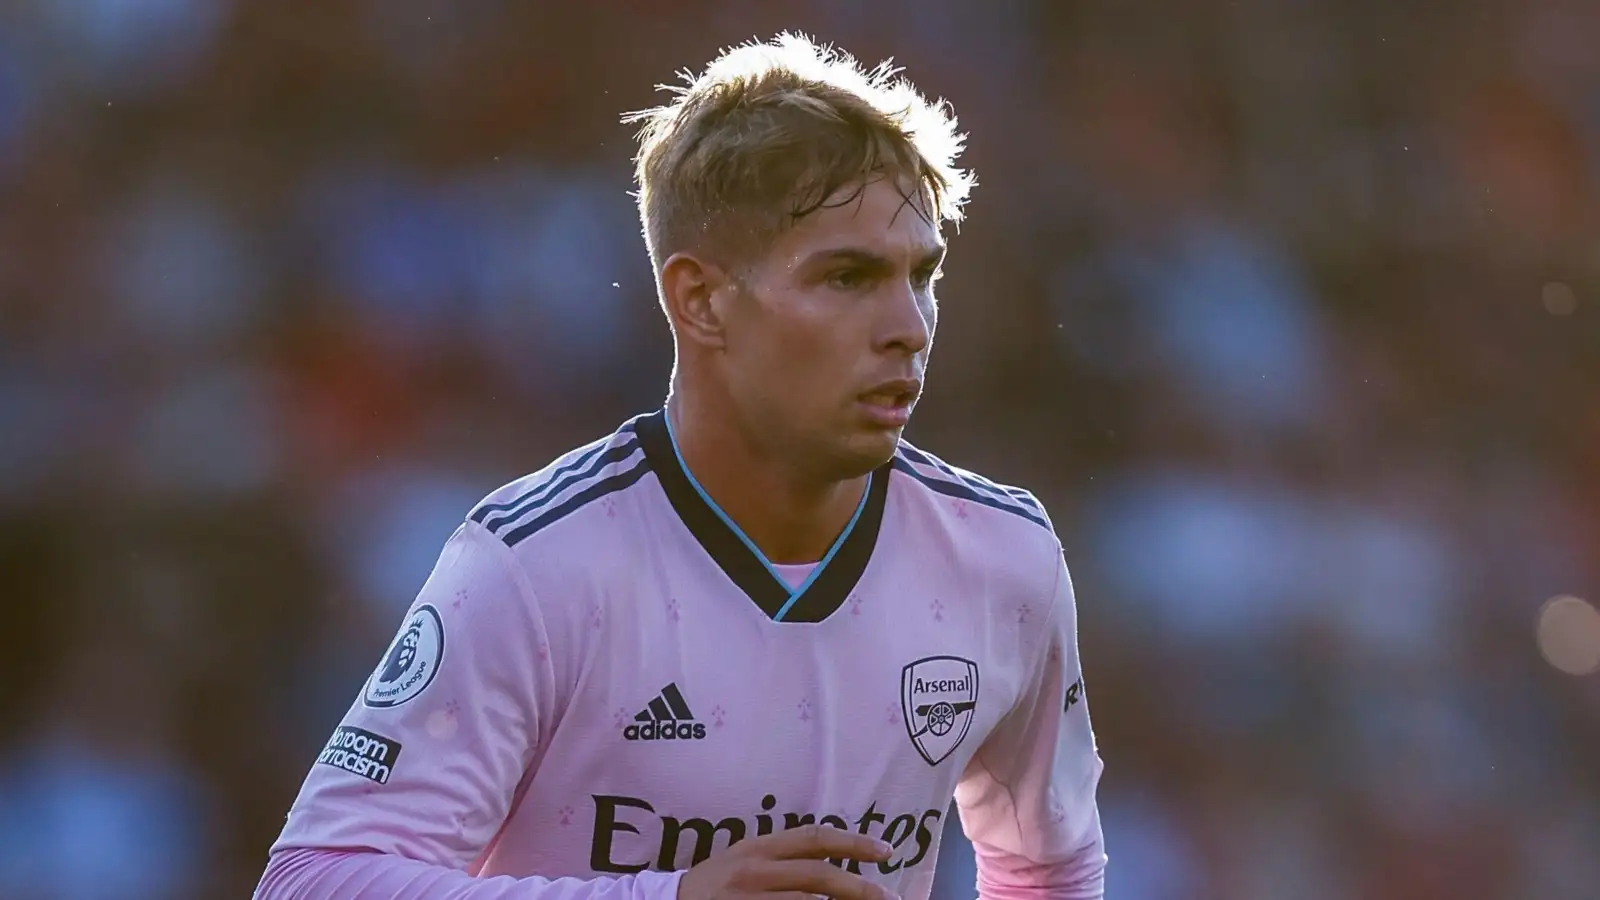 Arsenal midfielder Emile Smith Rowe during a match